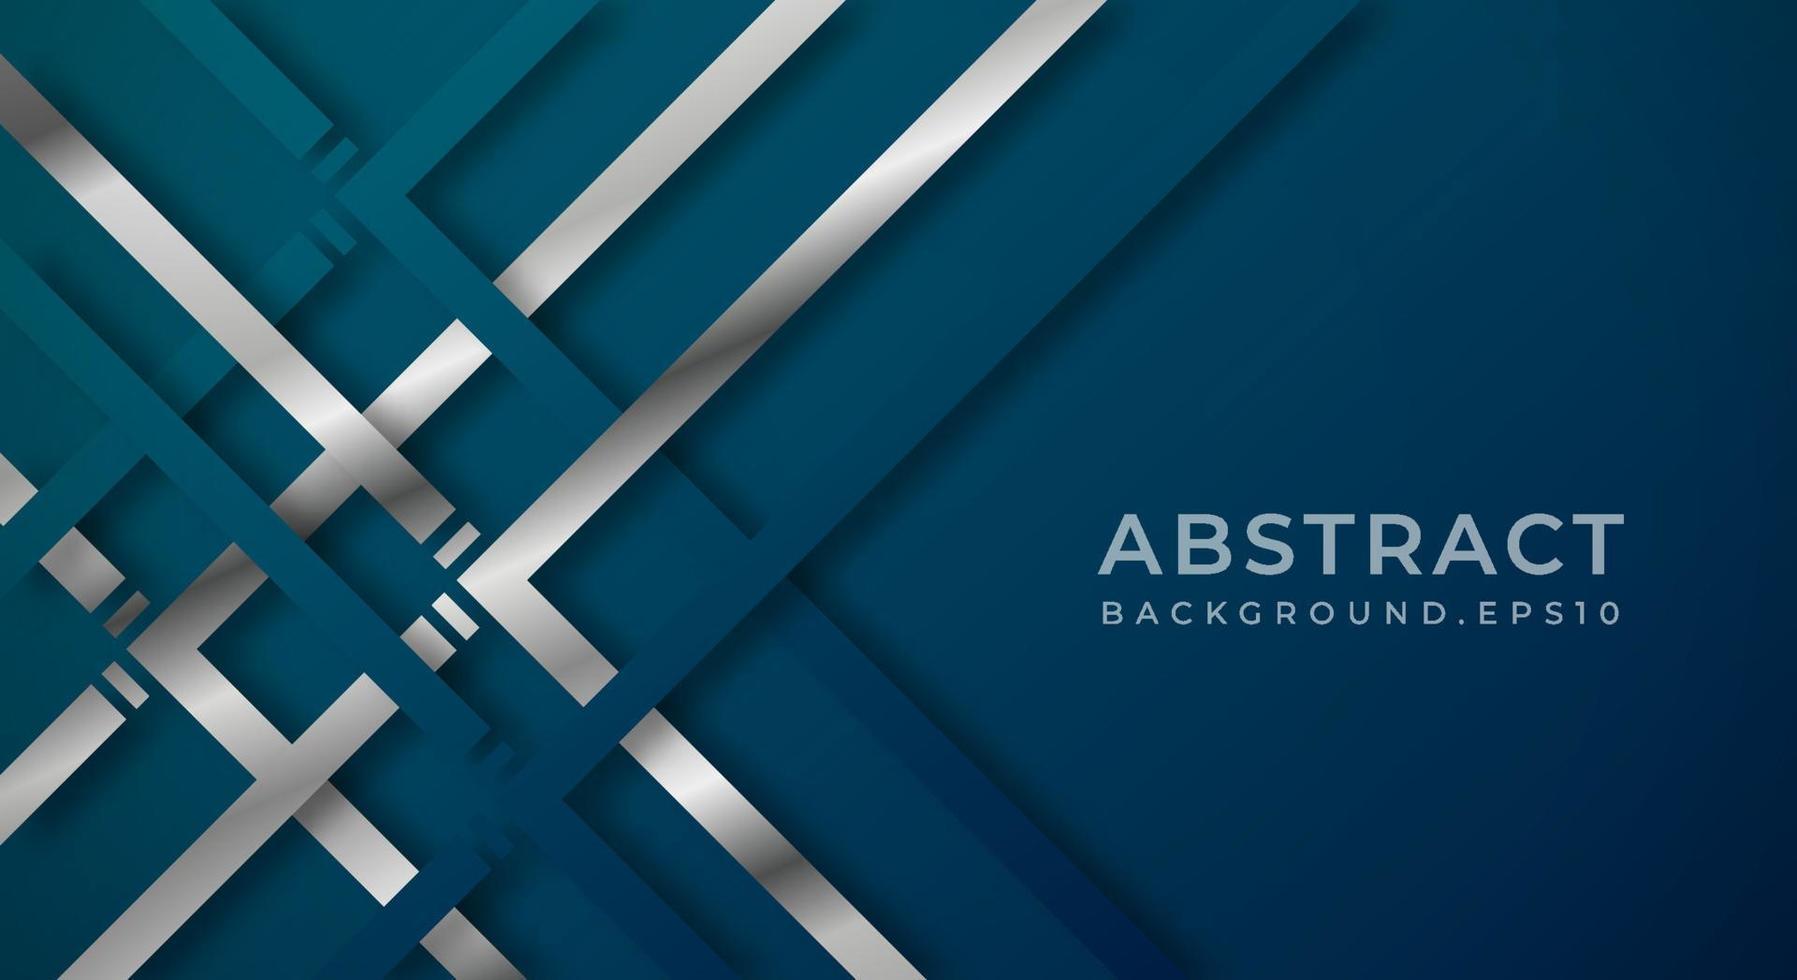 Abstract Dark Blue 3D Background with Silver and Blue Lines Paper Cut Style Textured. Usable for Decorative web layout, Poster, Banner, Corporate Brochure and Seminar Template Design vector